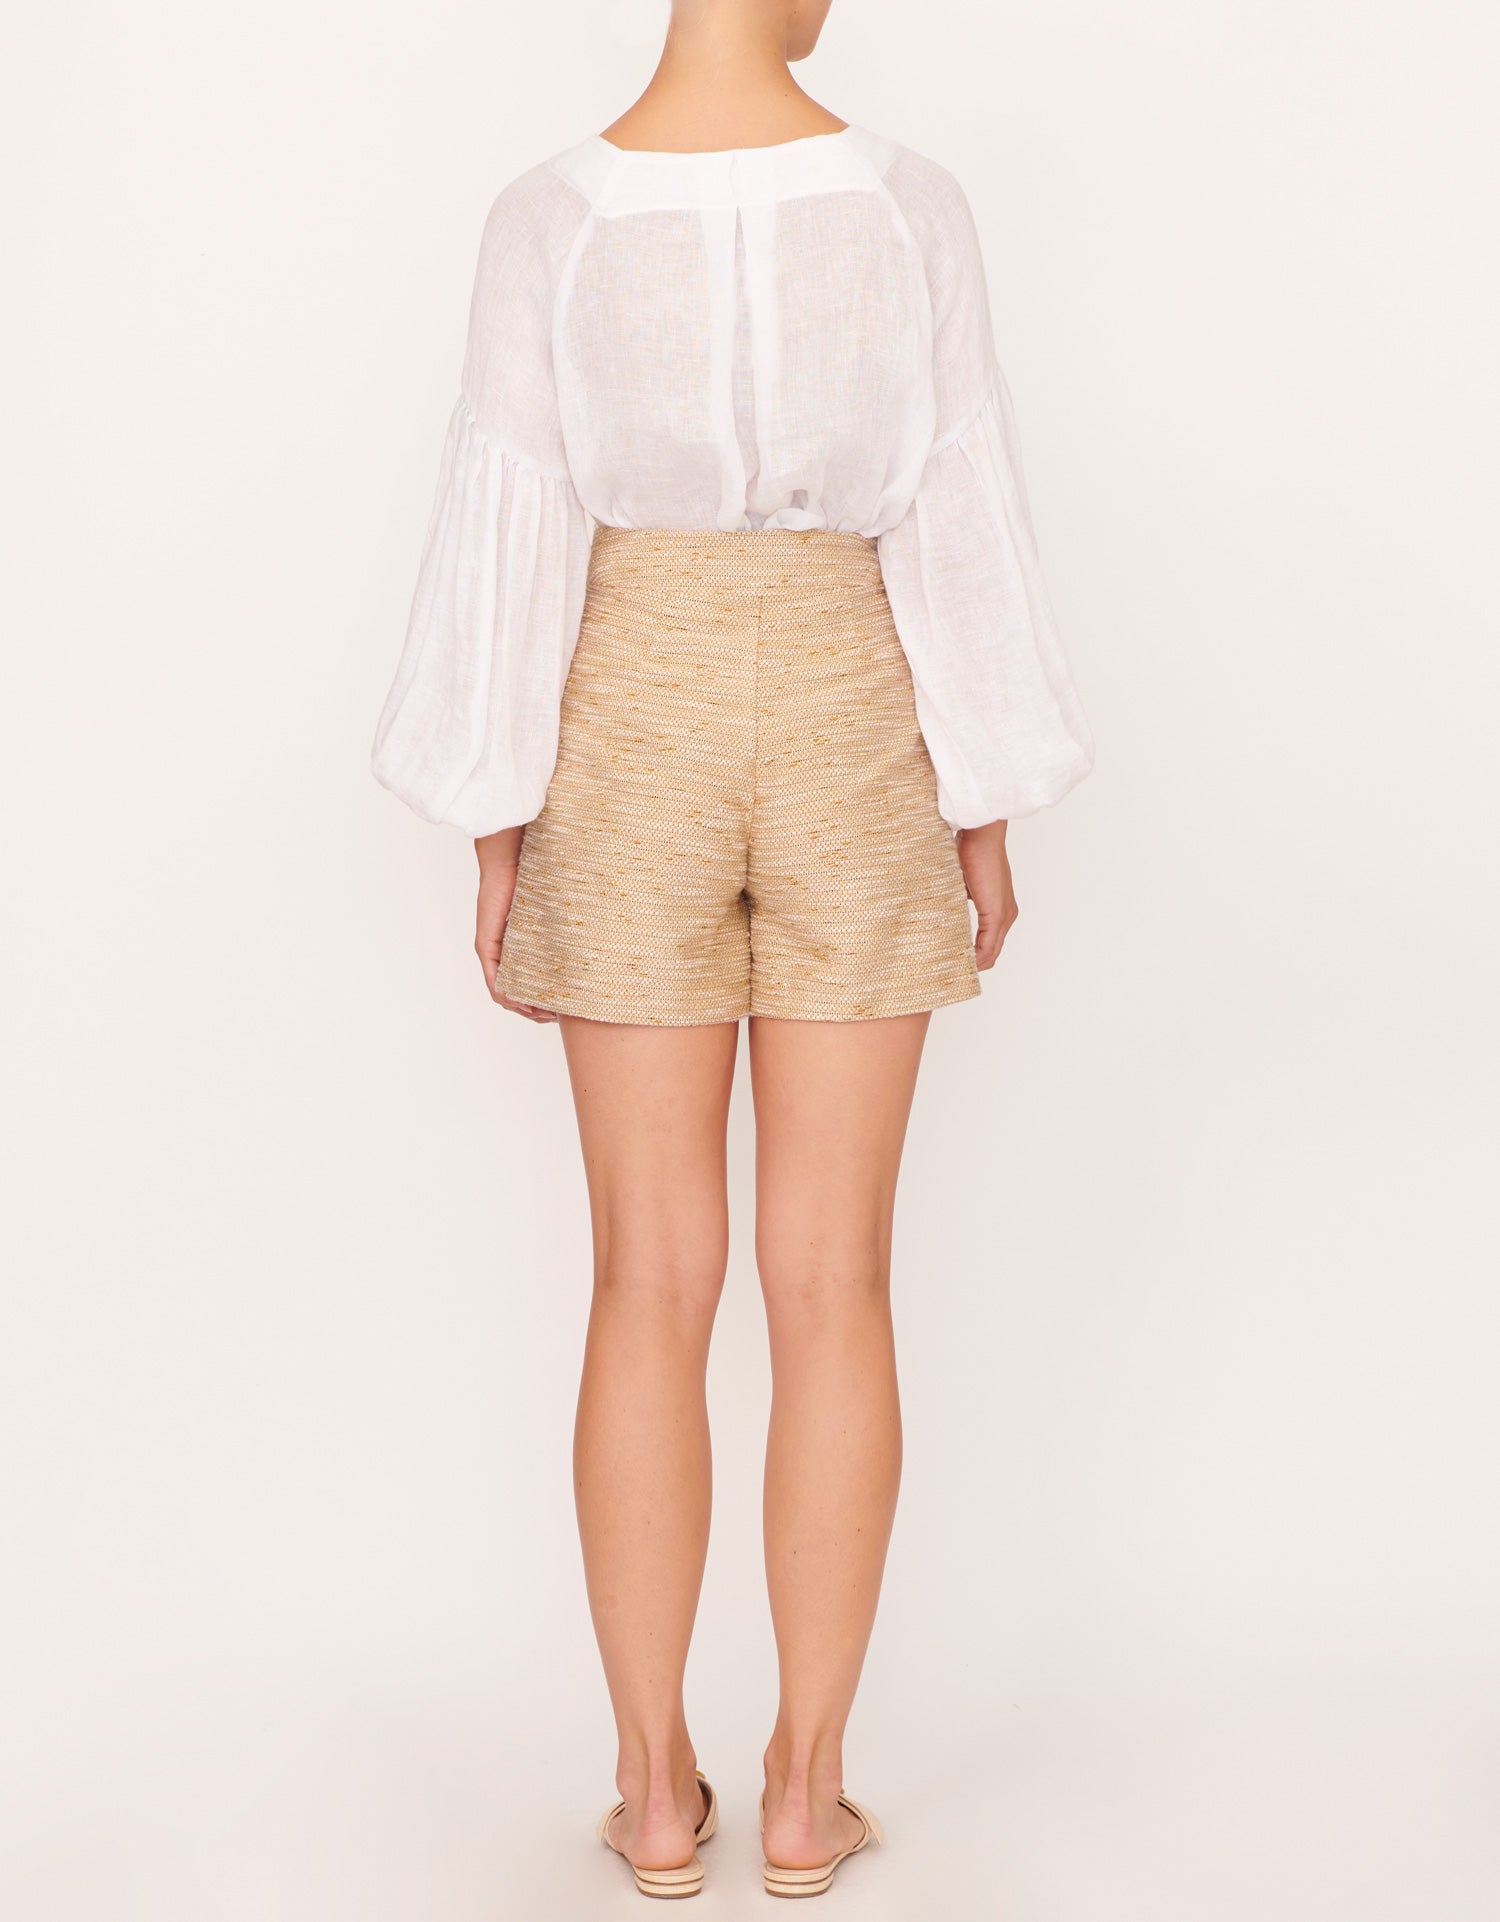 Romantic Full Sleeve Top and Textured Tailored Short by Apartment Clothing